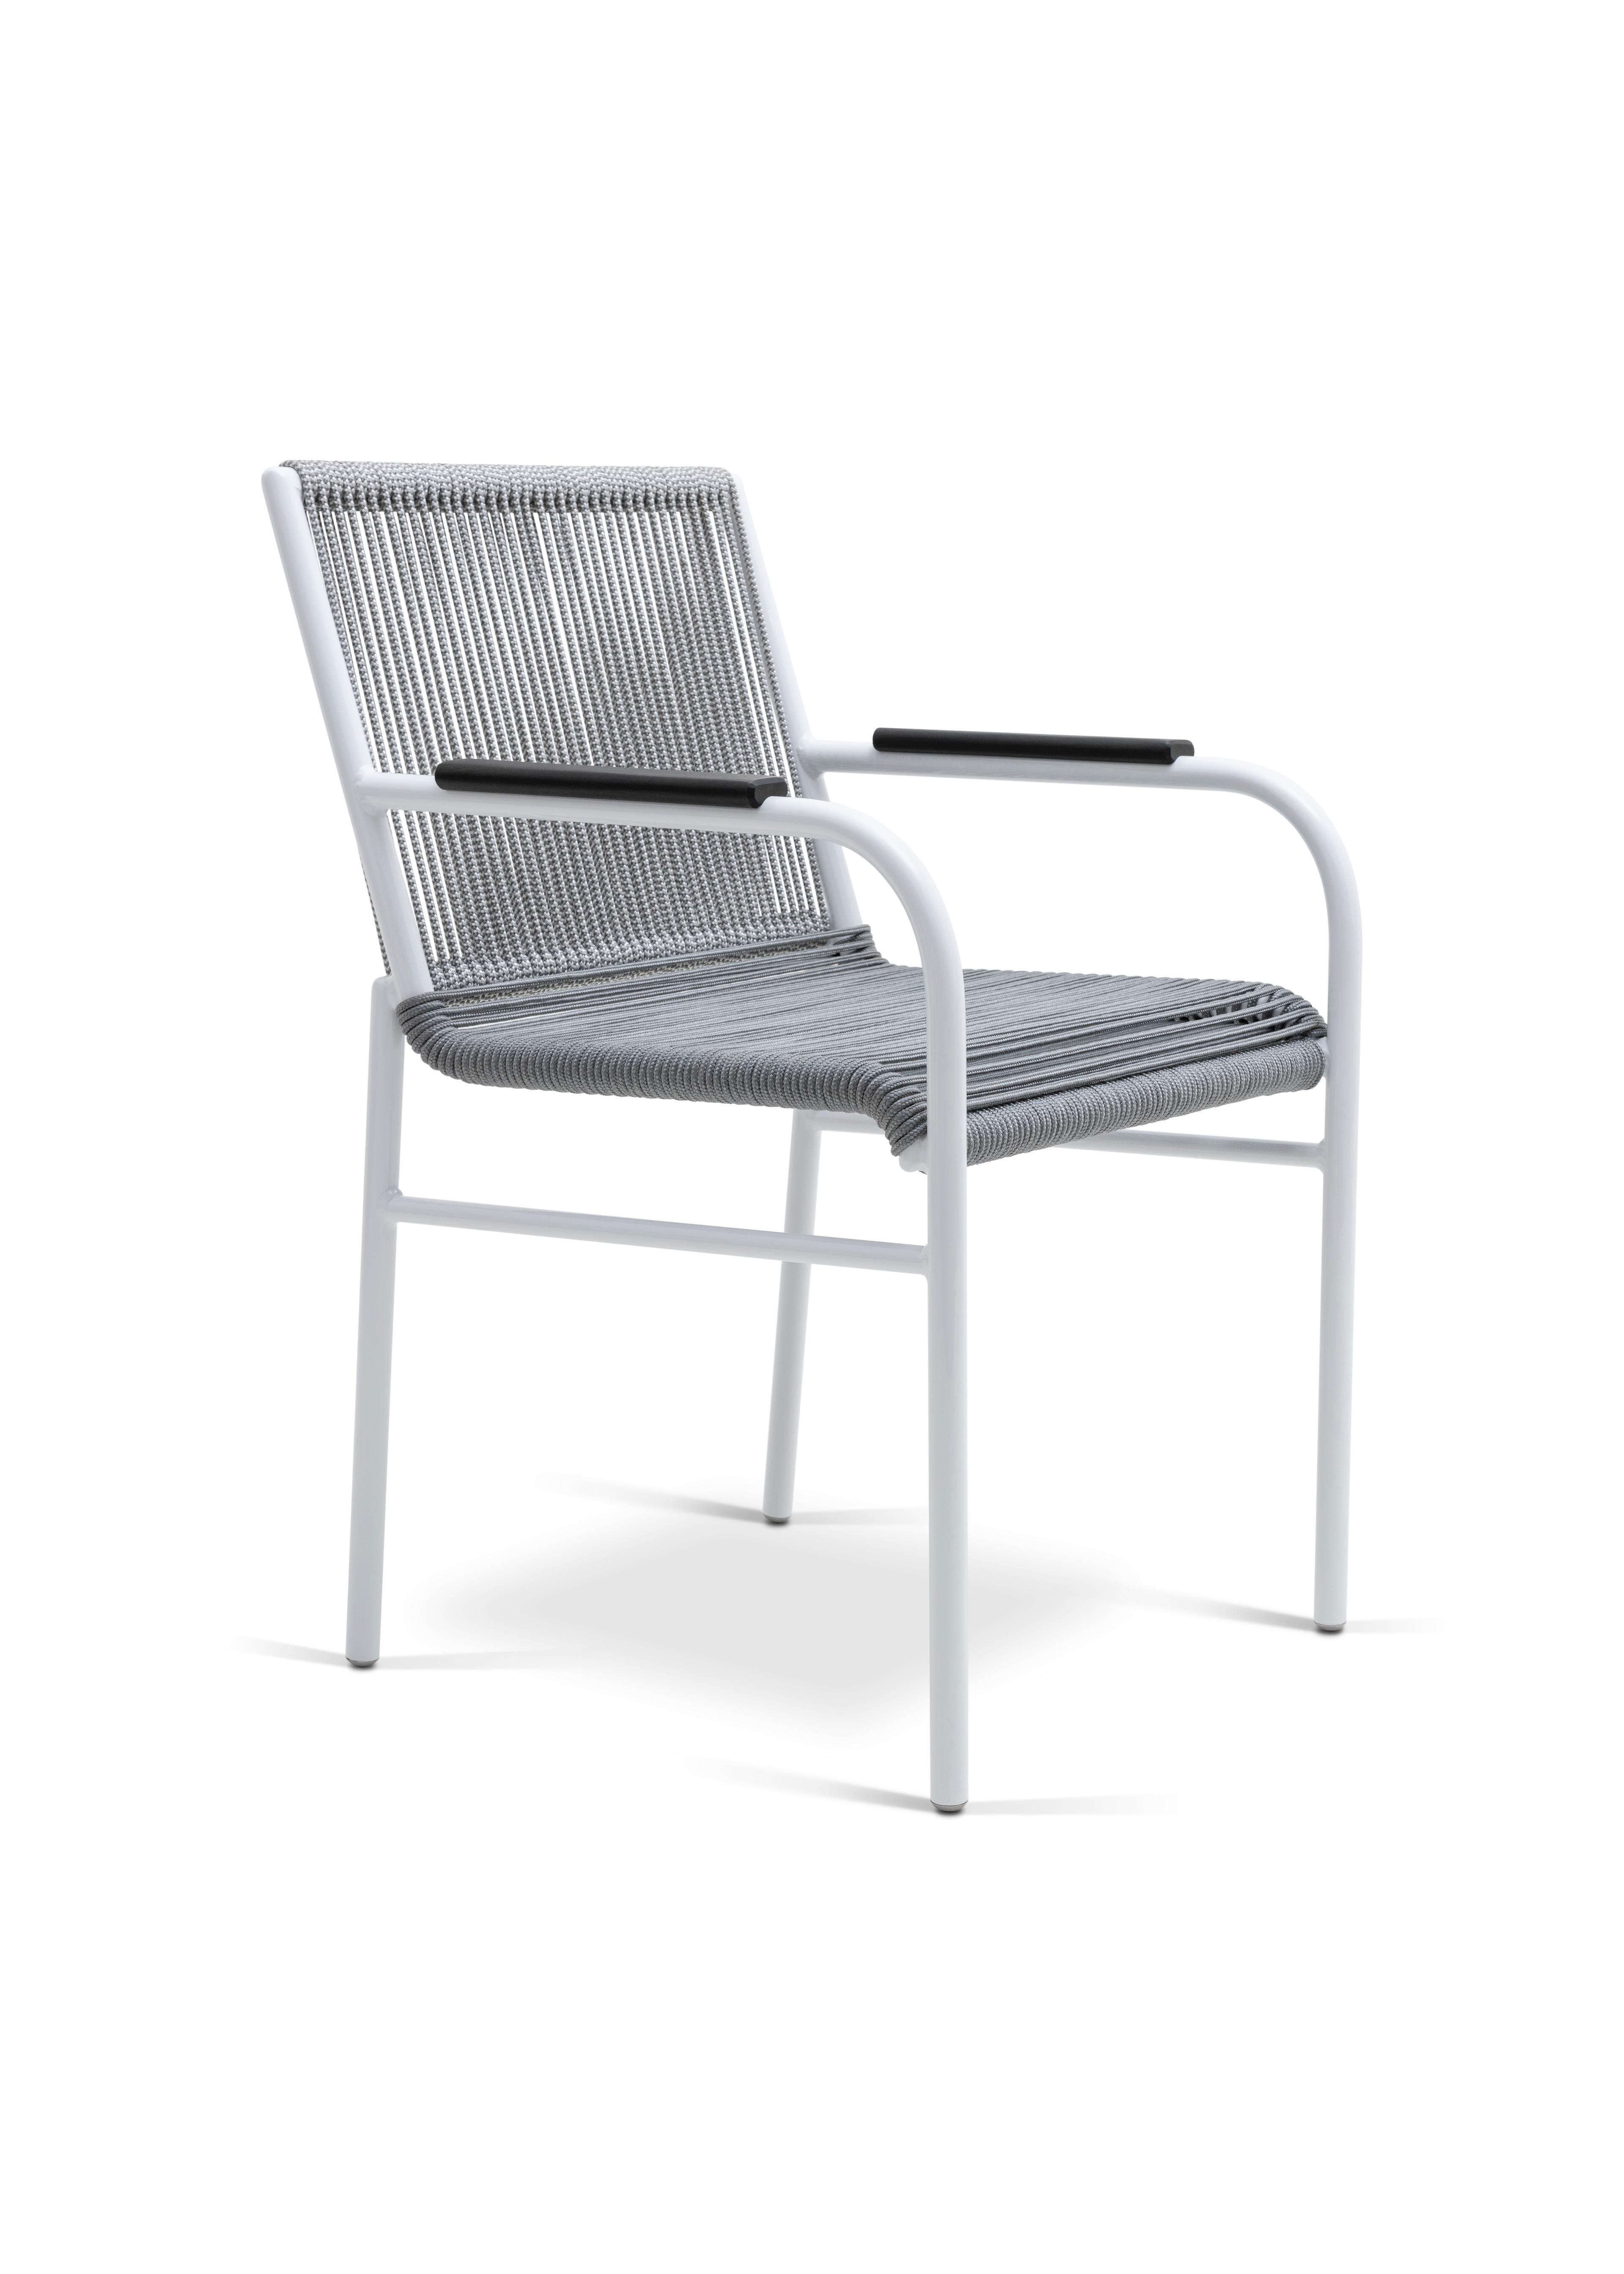 TRAÇO CHAIR WITH ARMS